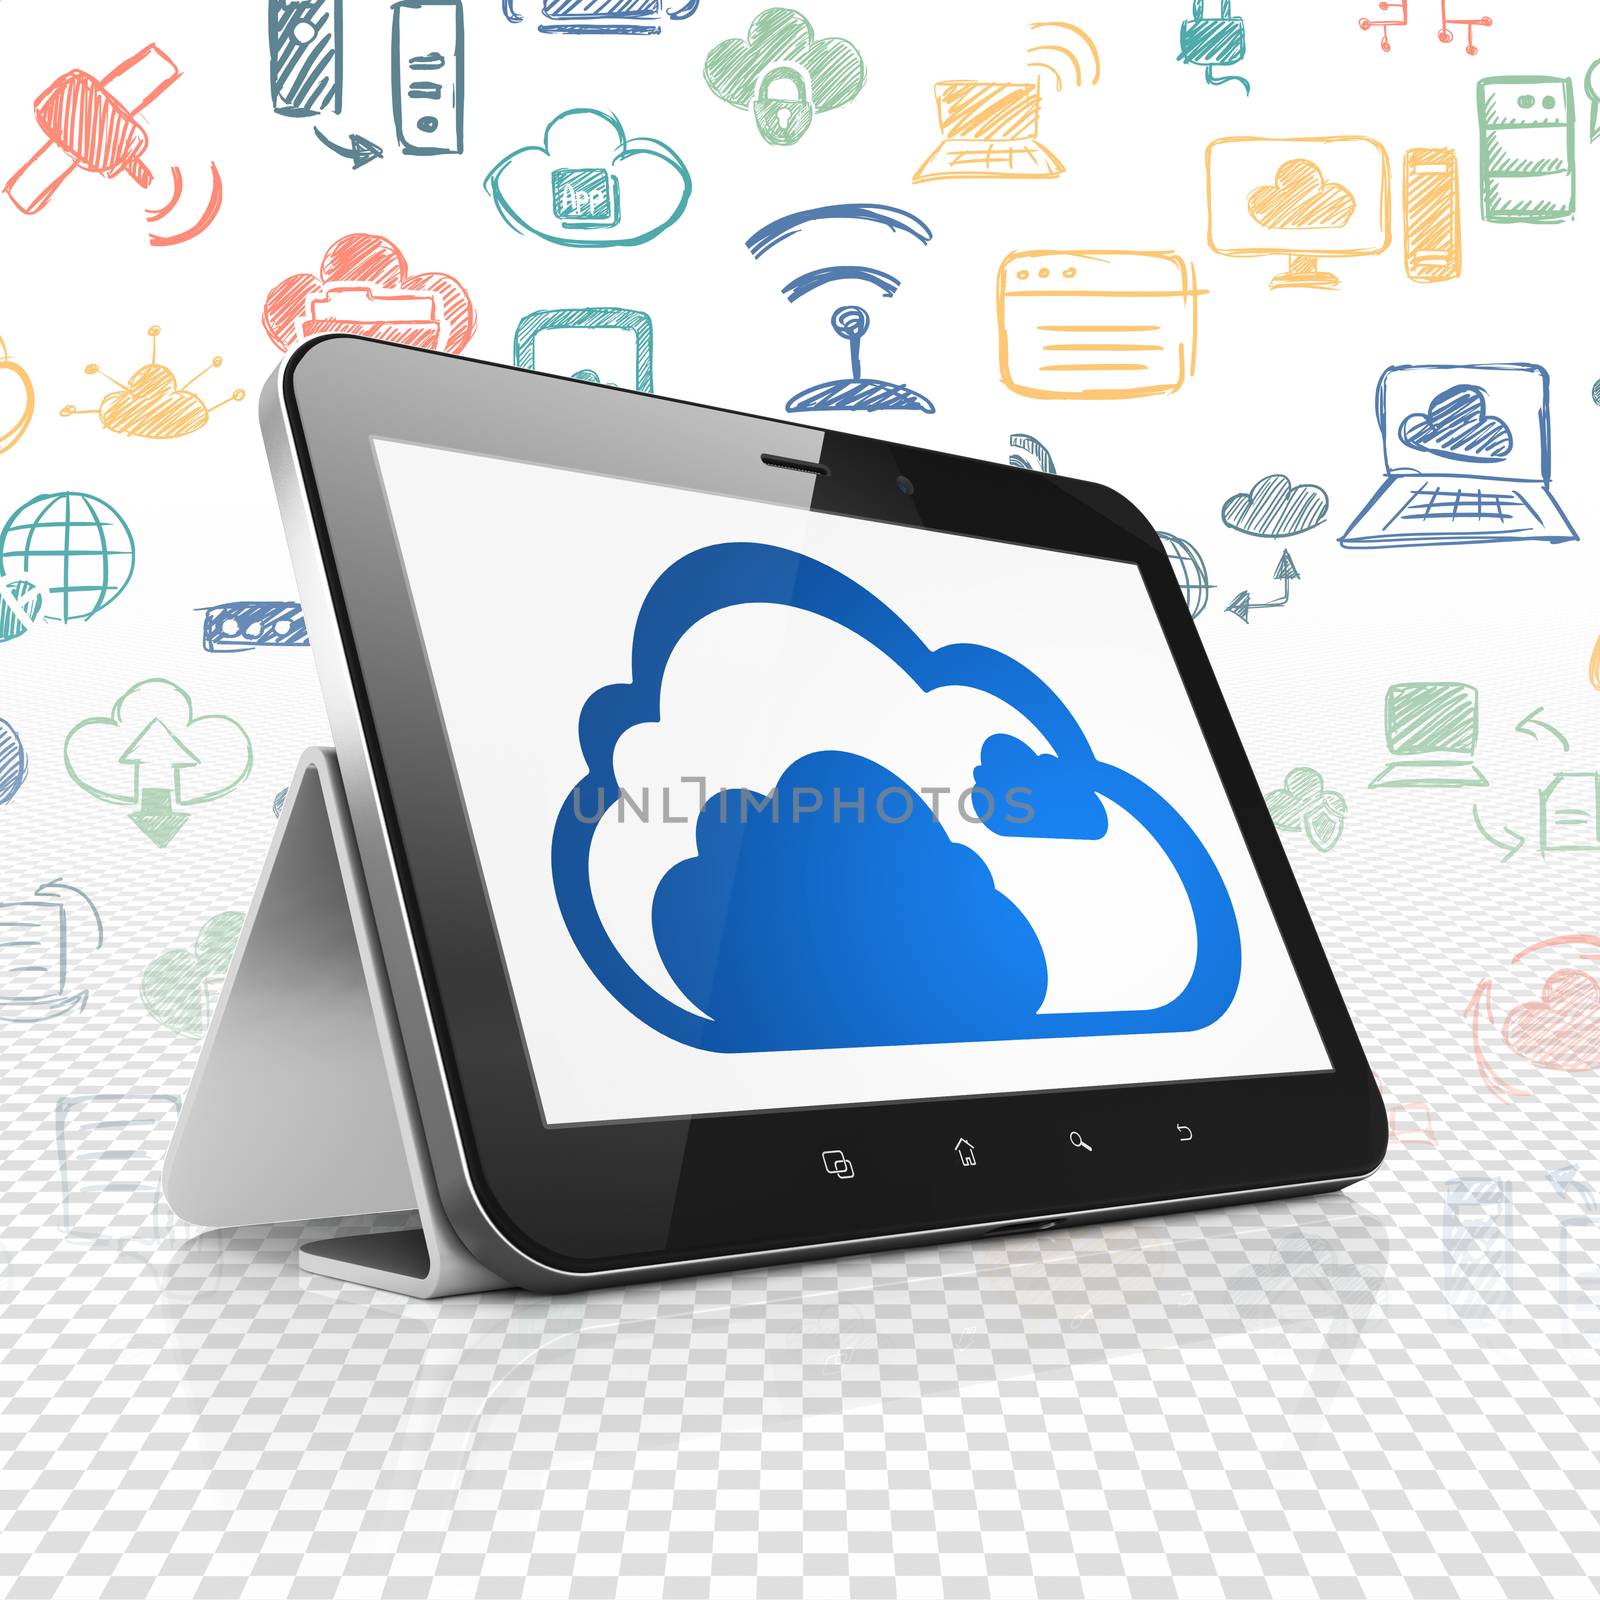 Cloud networking concept: Tablet Computer with  blue Cloud icon on display,  Hand Drawn Cloud Technology Icons background, 3D rendering